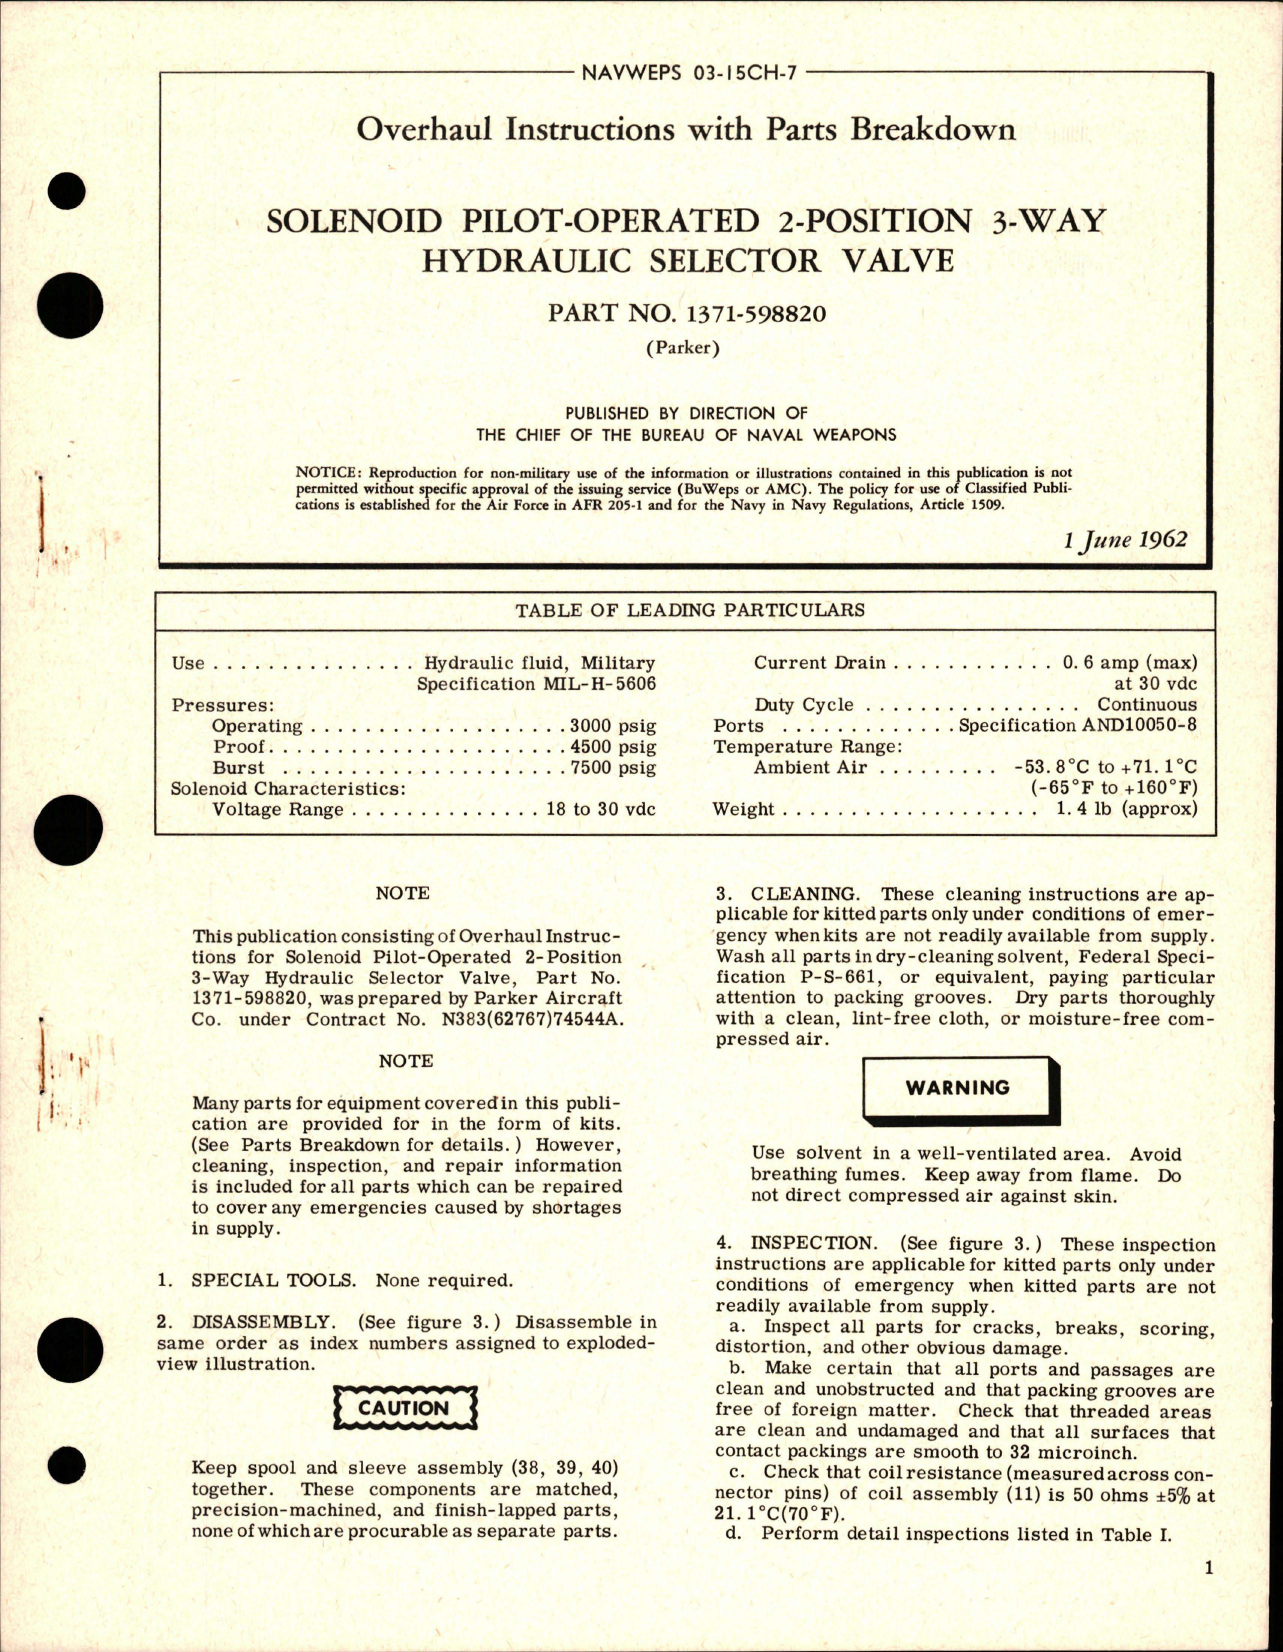 Sample page 1 from AirCorps Library document: Overhaul Instructions with Parts Breakdown for Solenoid Pilot Operated 2 Position 3 Way Hydraulic Selector Valve - Part 1371-598820